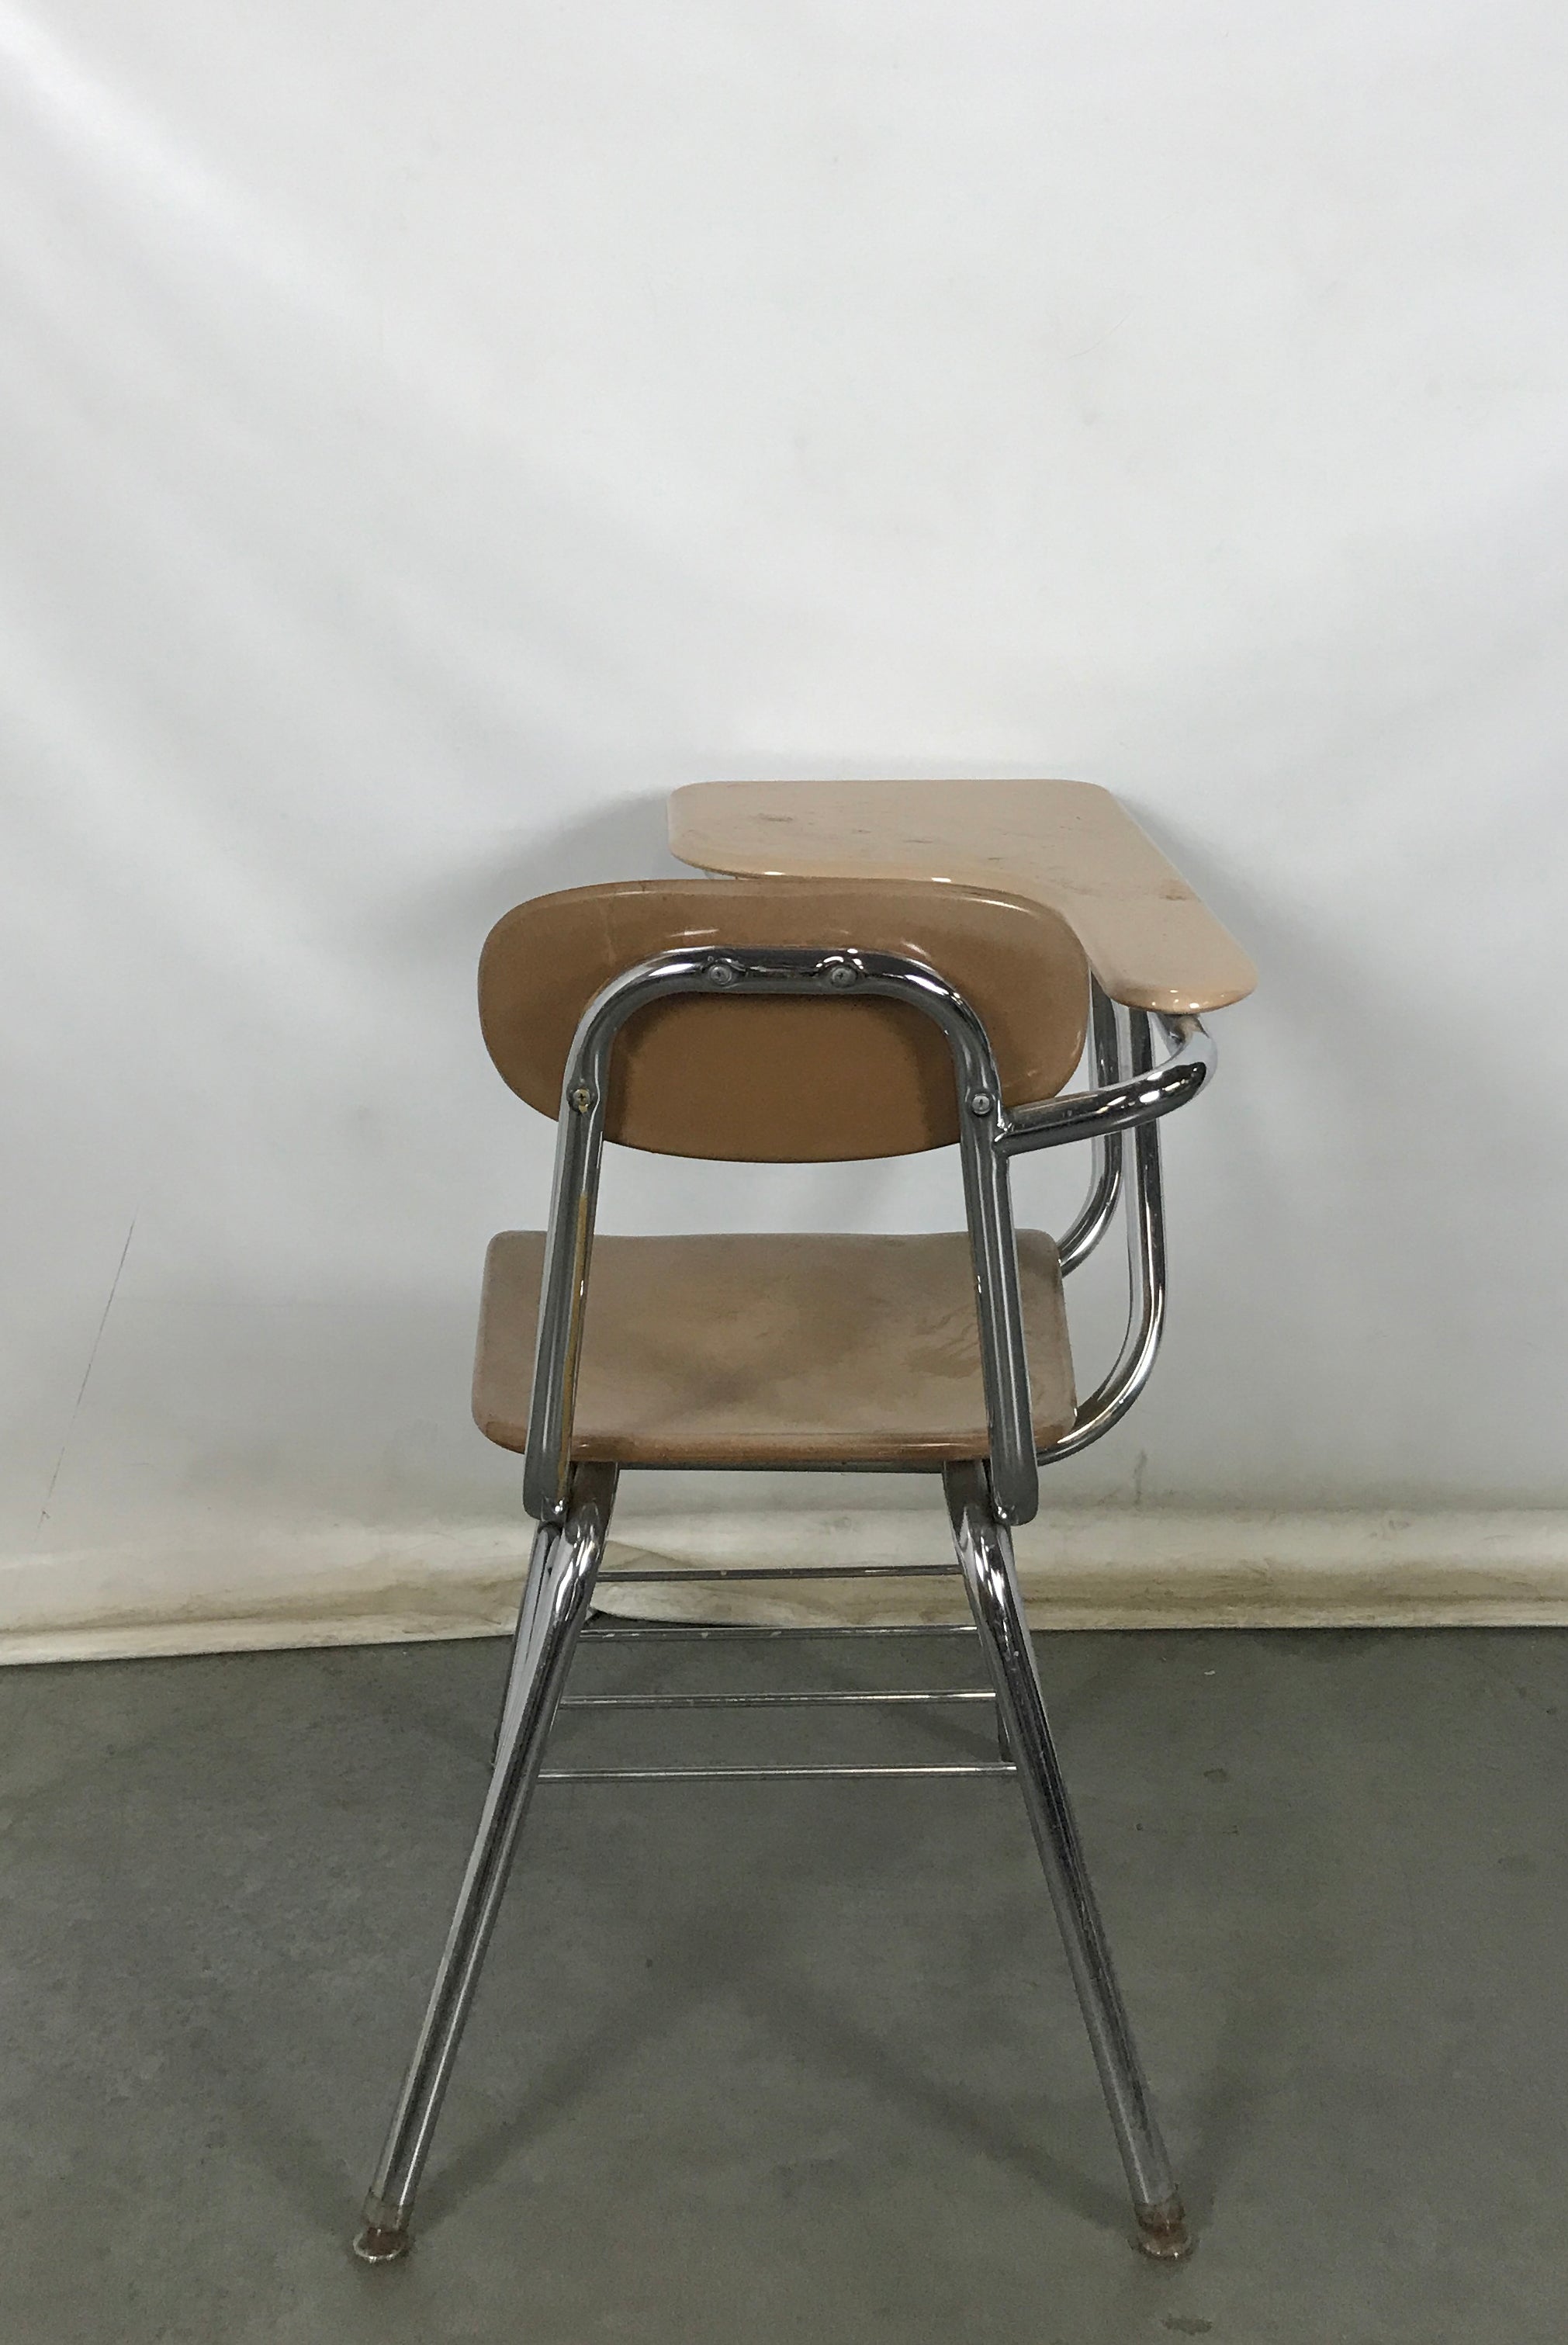 Right-Sided Tan Student Desk